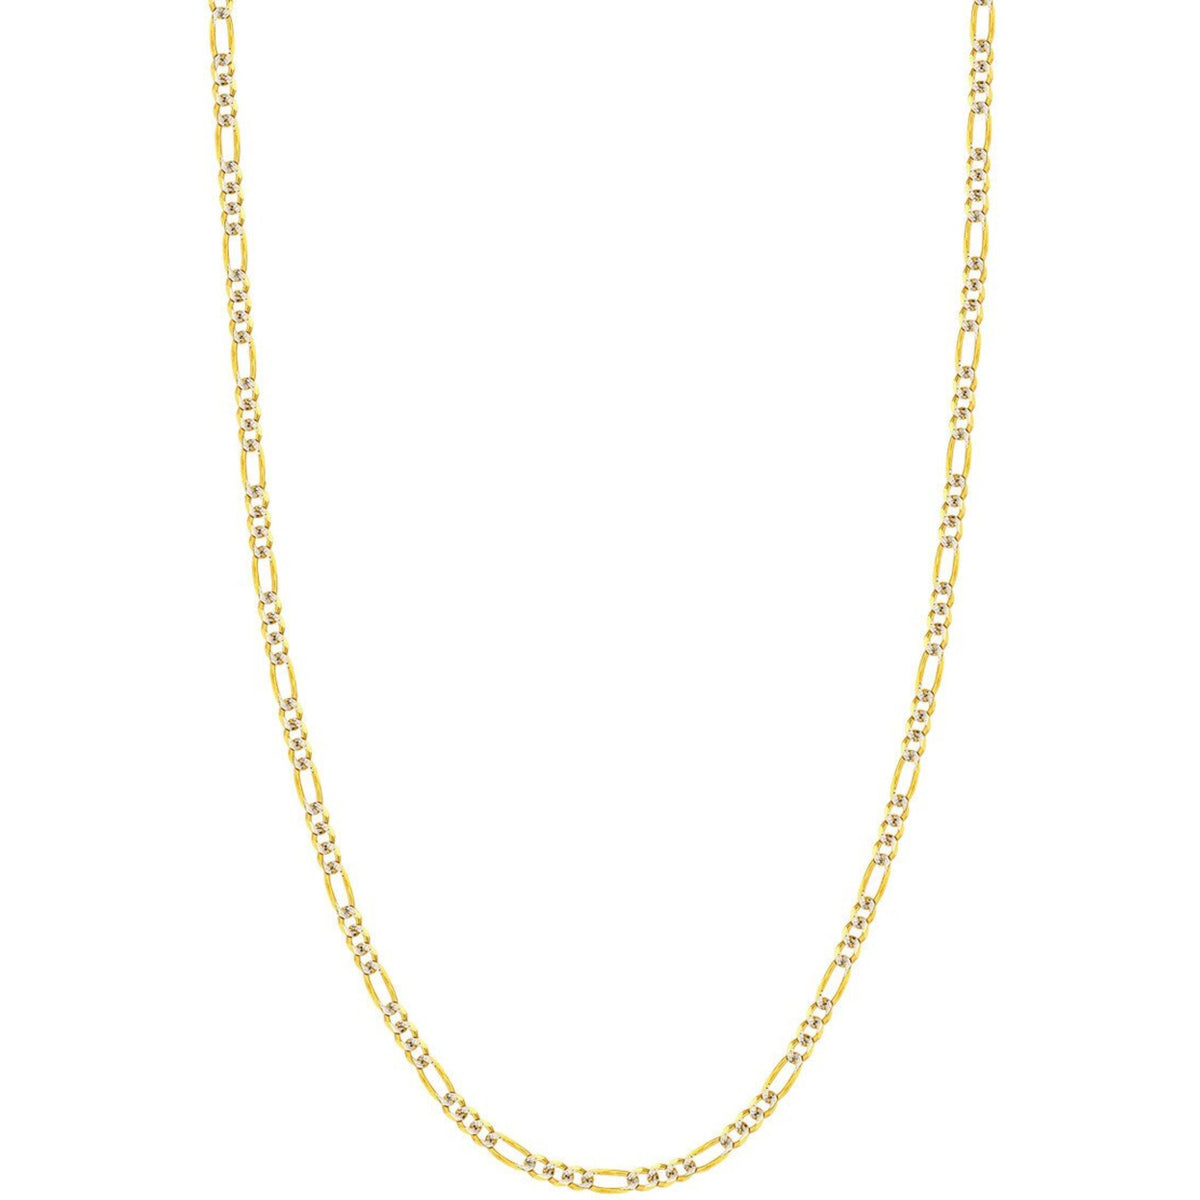 Olas d'Oro 20" Necklace - 14K Yellow/White Gold 3.2mm Two-Tone Pave Figaro Chain with Lobster Lock